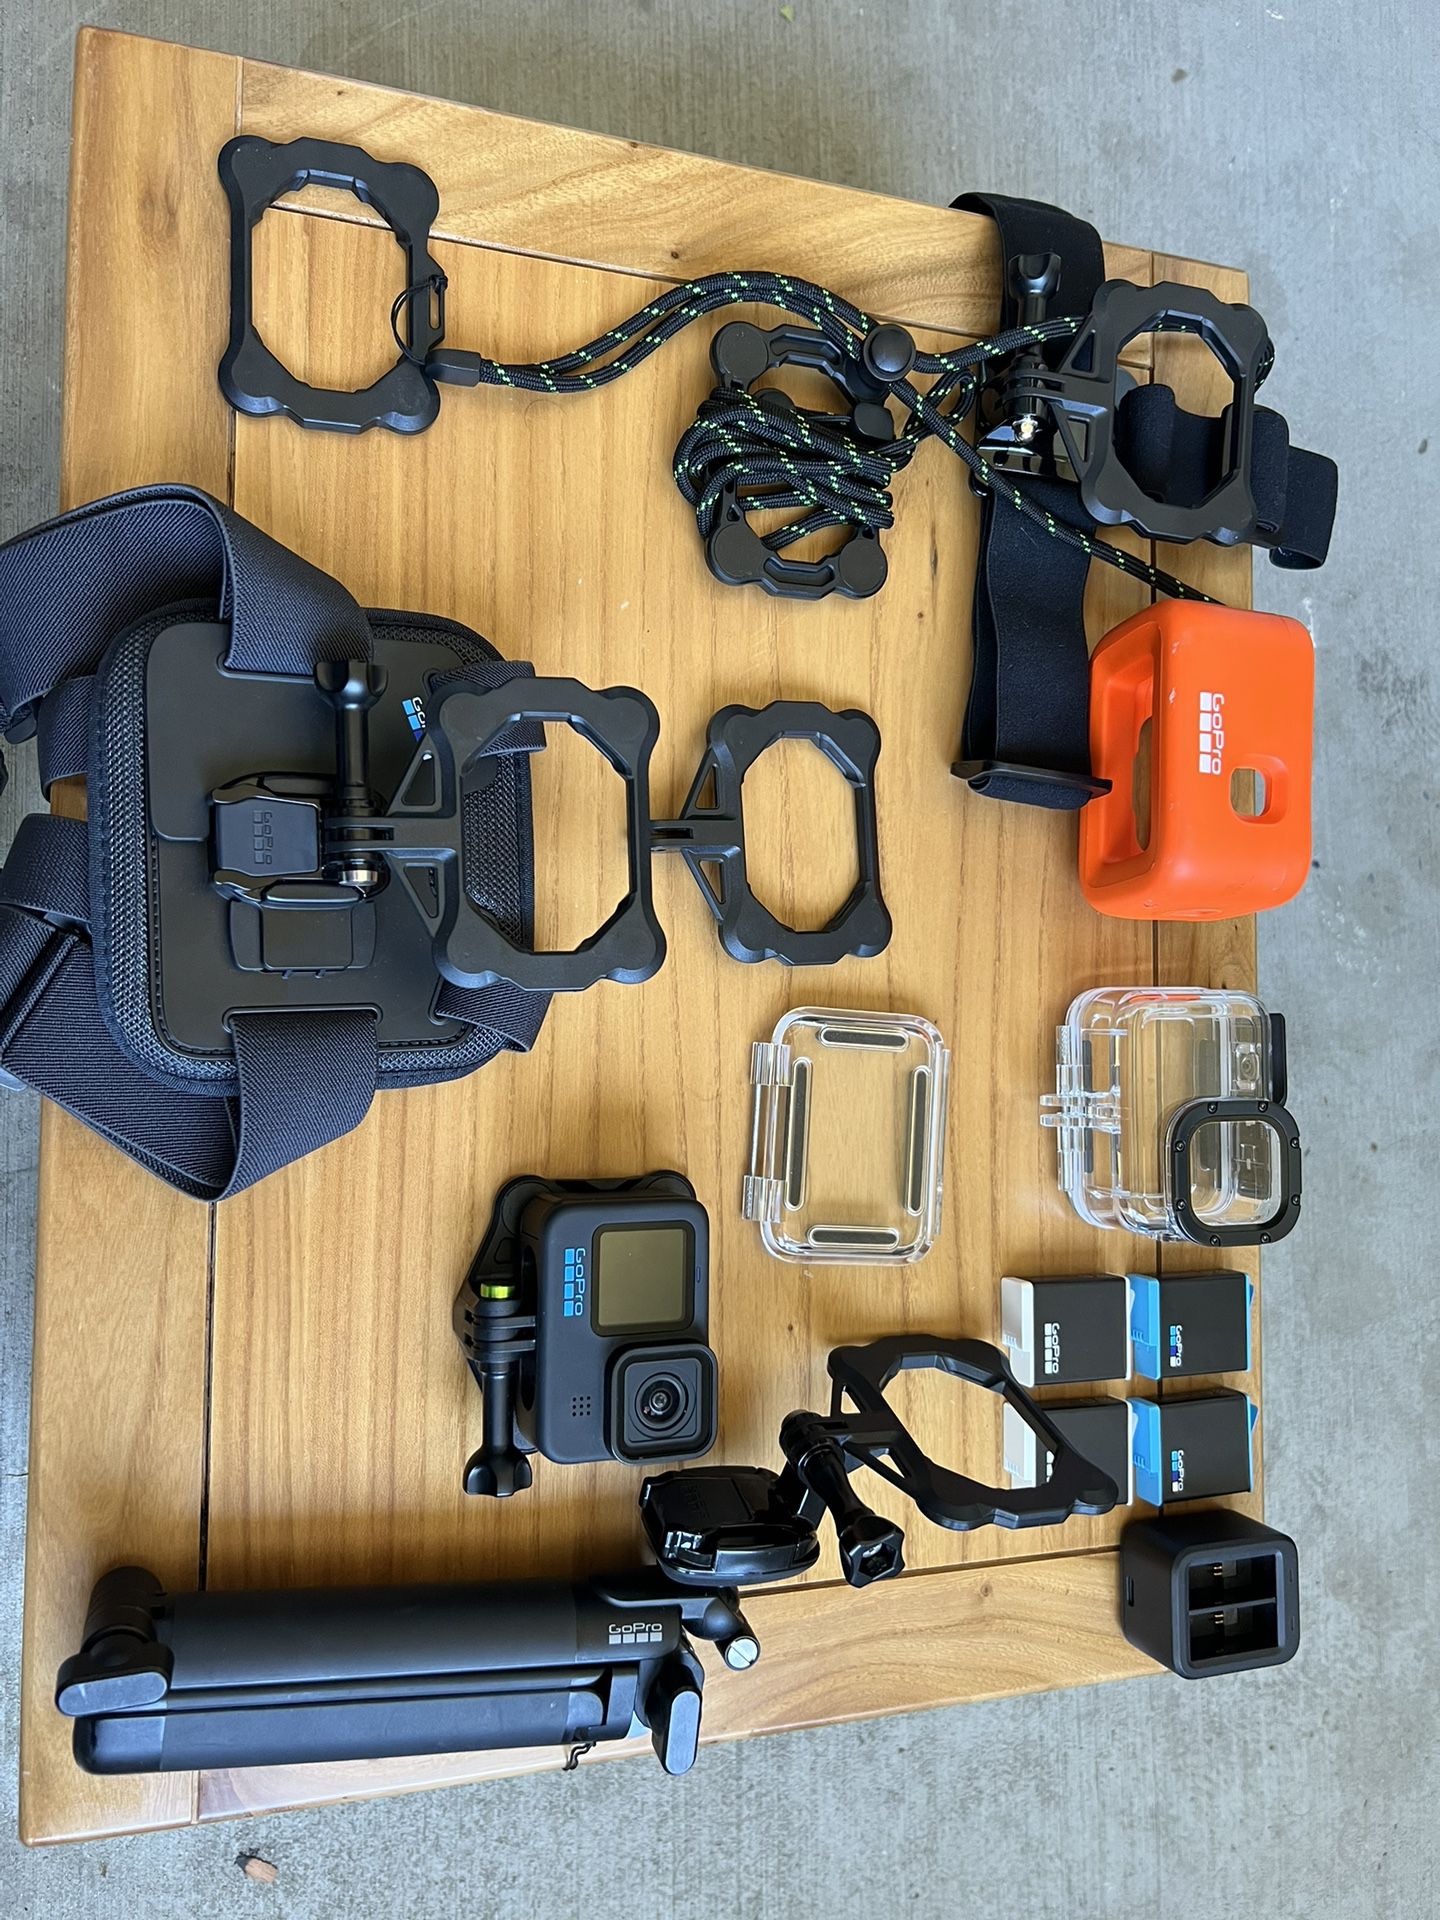 GoPro Package Deal Everything You Need! (Snap Mounts, Mounts, Accessories, Gear)